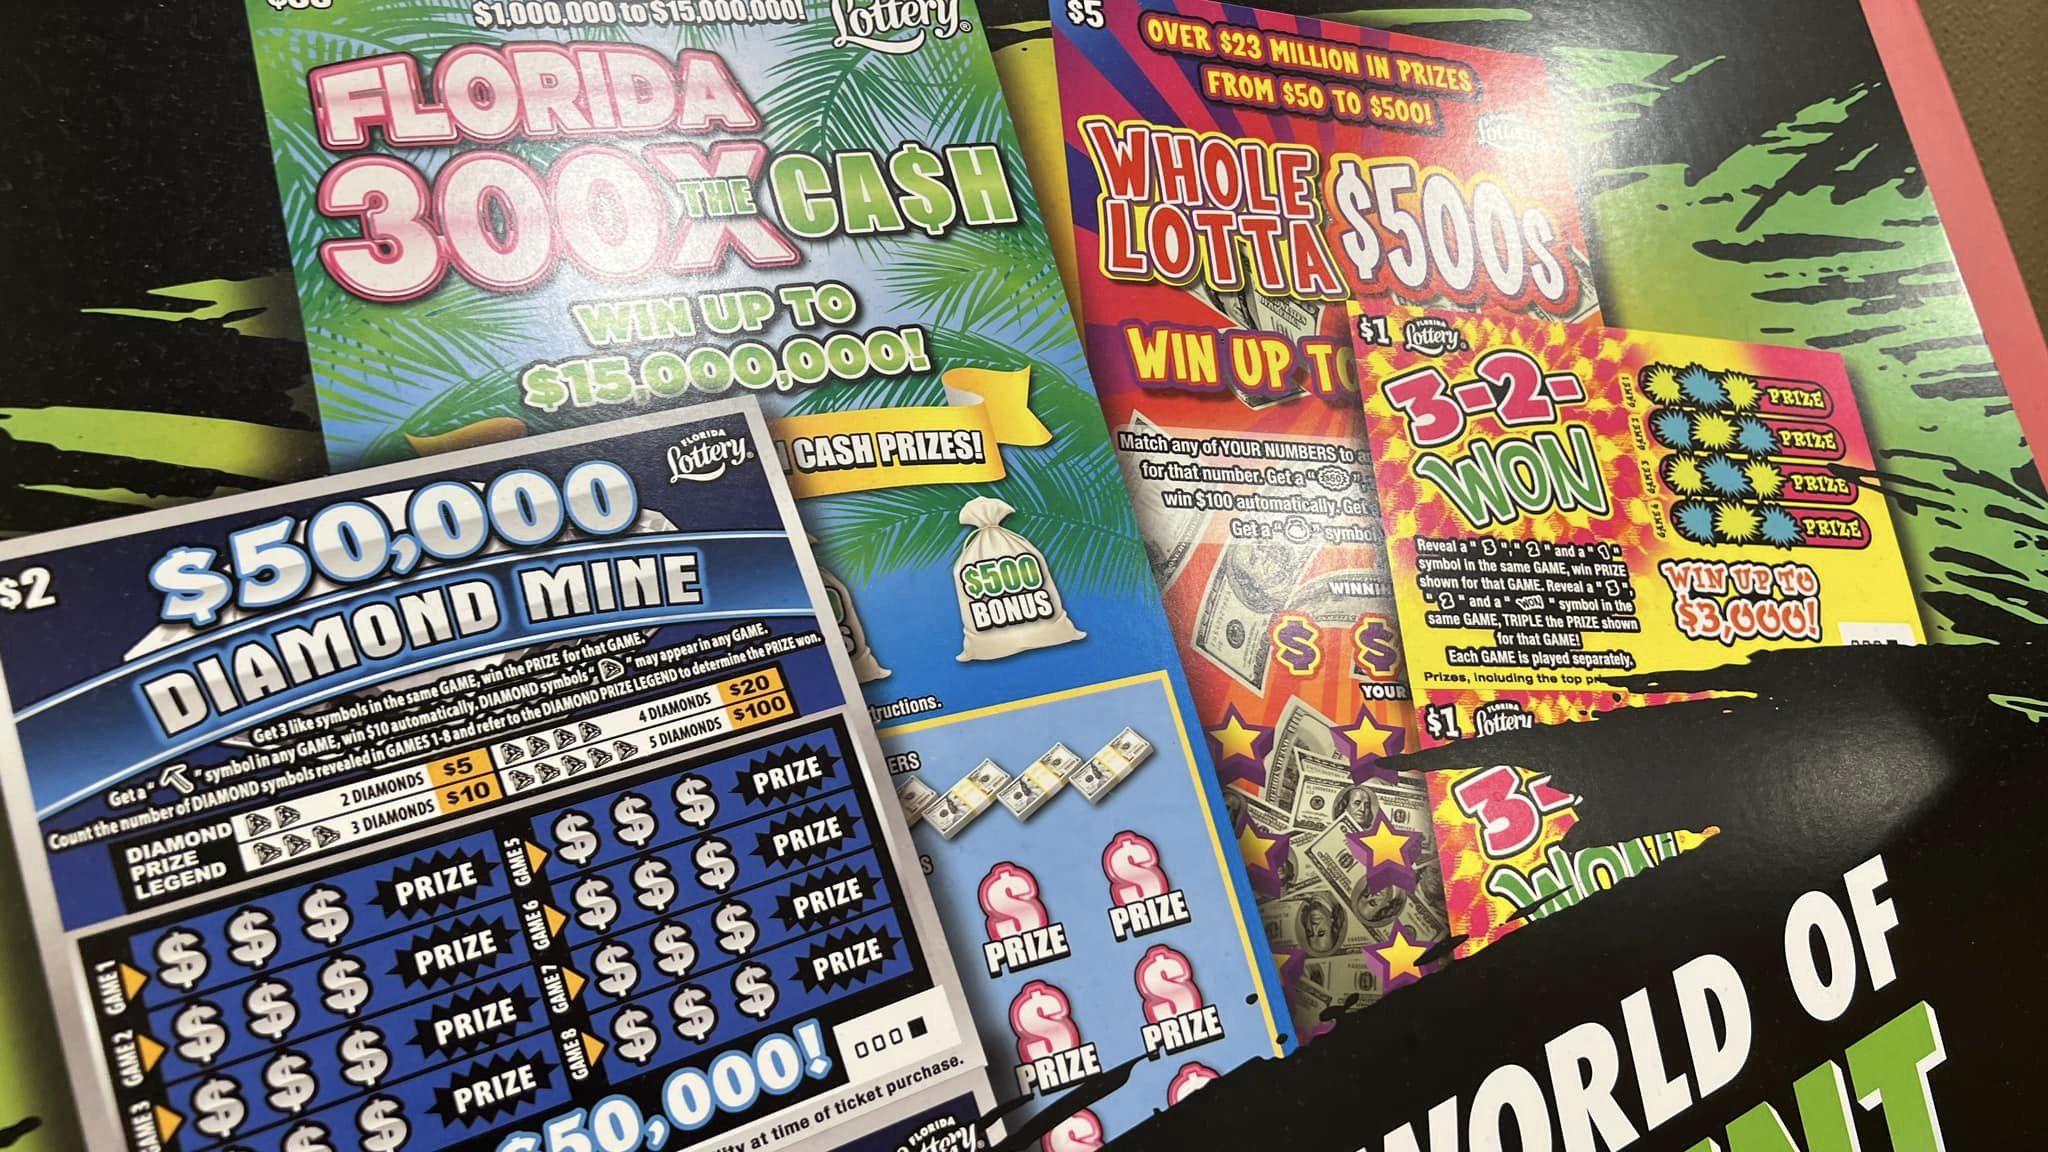 Tampa Woman Wins 1 Million From Scratchoff Ticket Q105